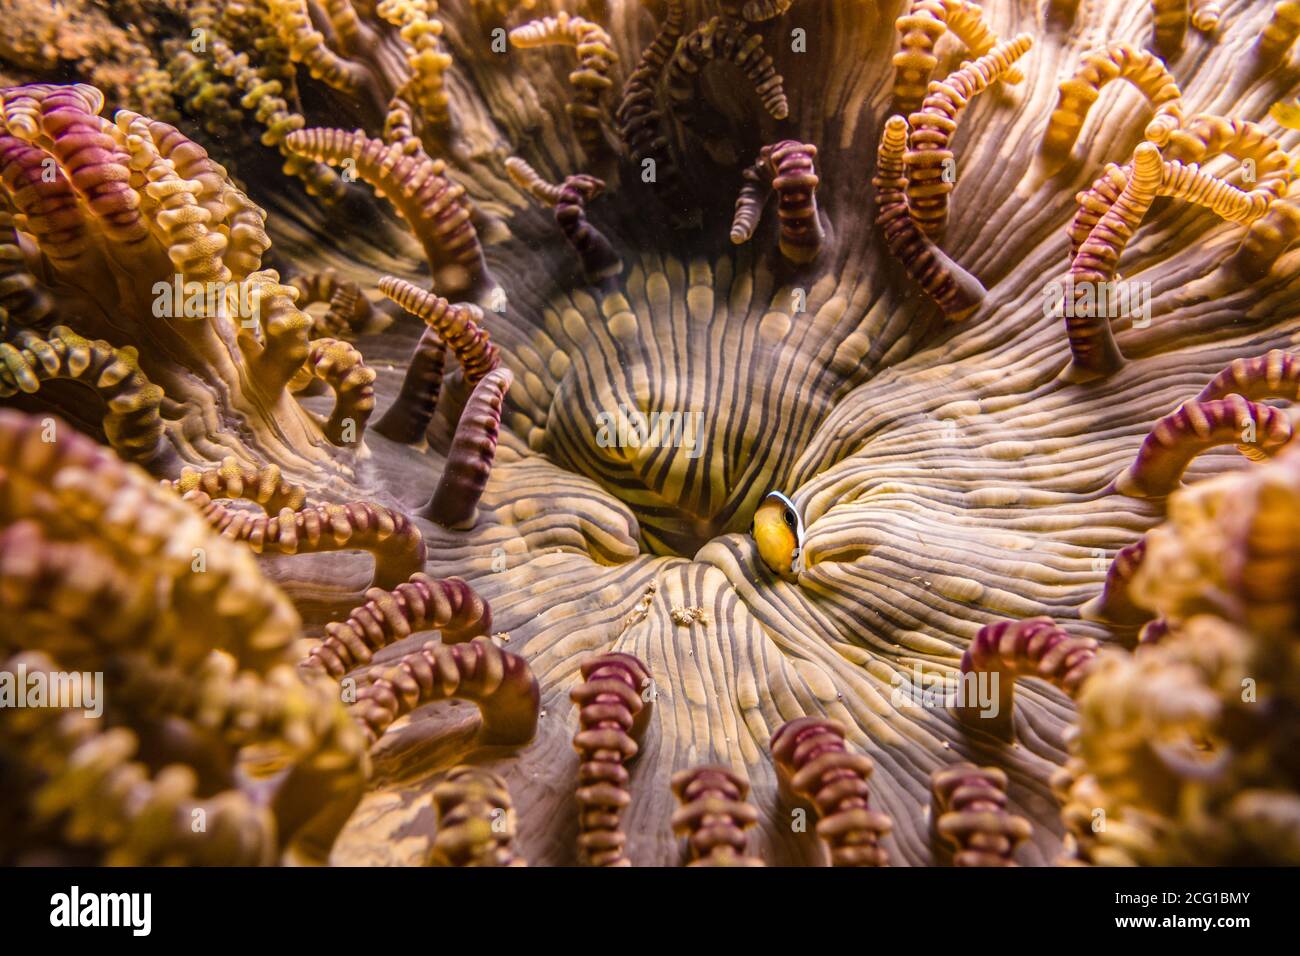 clown fish in an anemone on coral reef Stock Photo